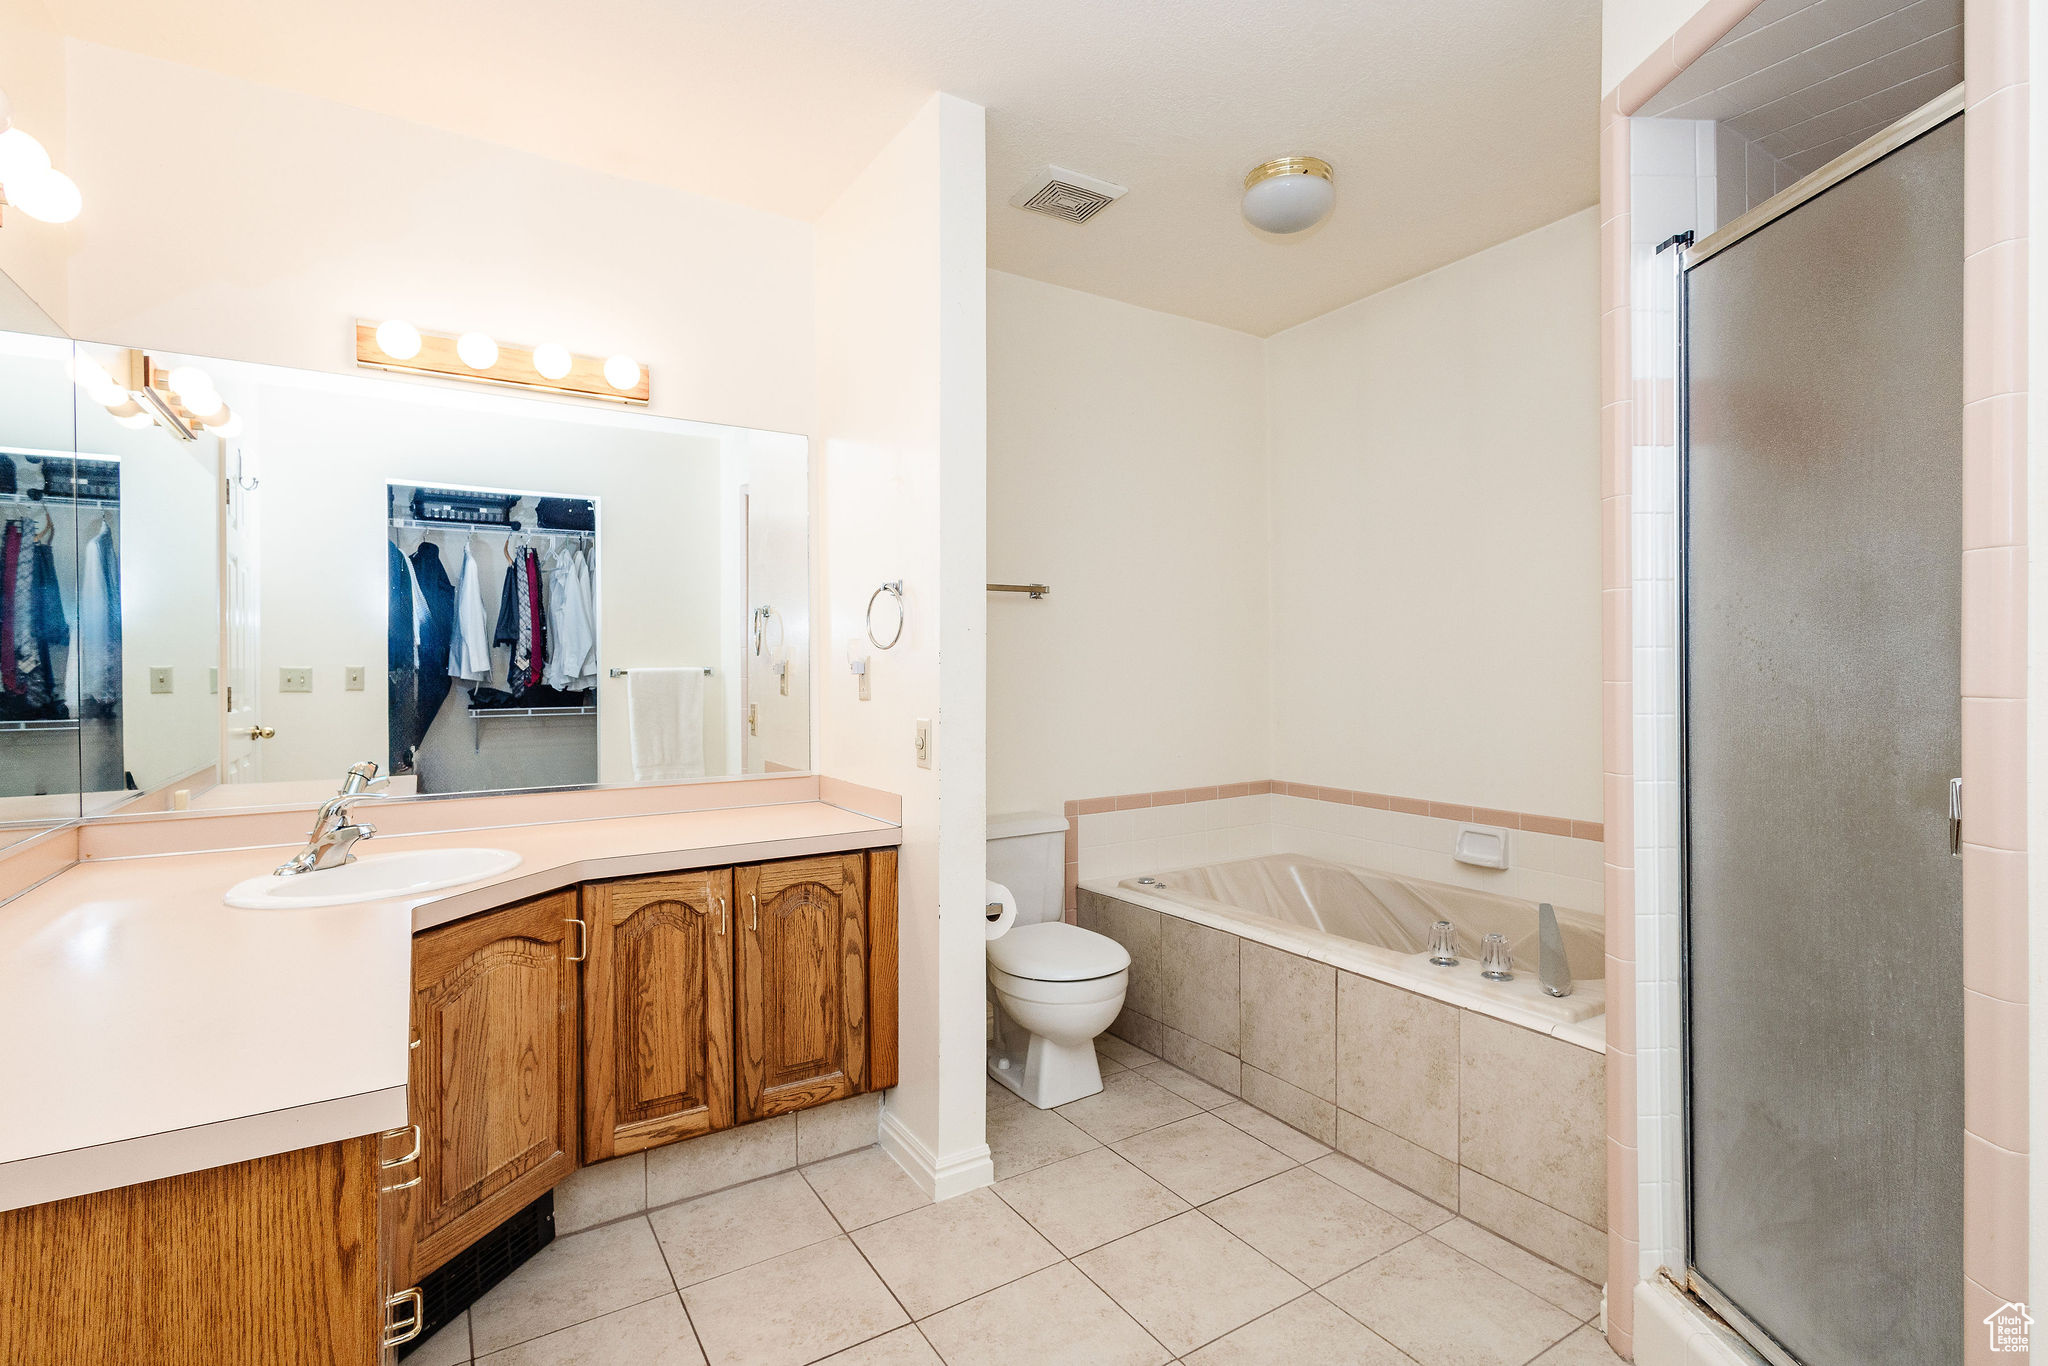 Full bathroom featuring tile flooring, vanity, separate shower and tub, and toilet